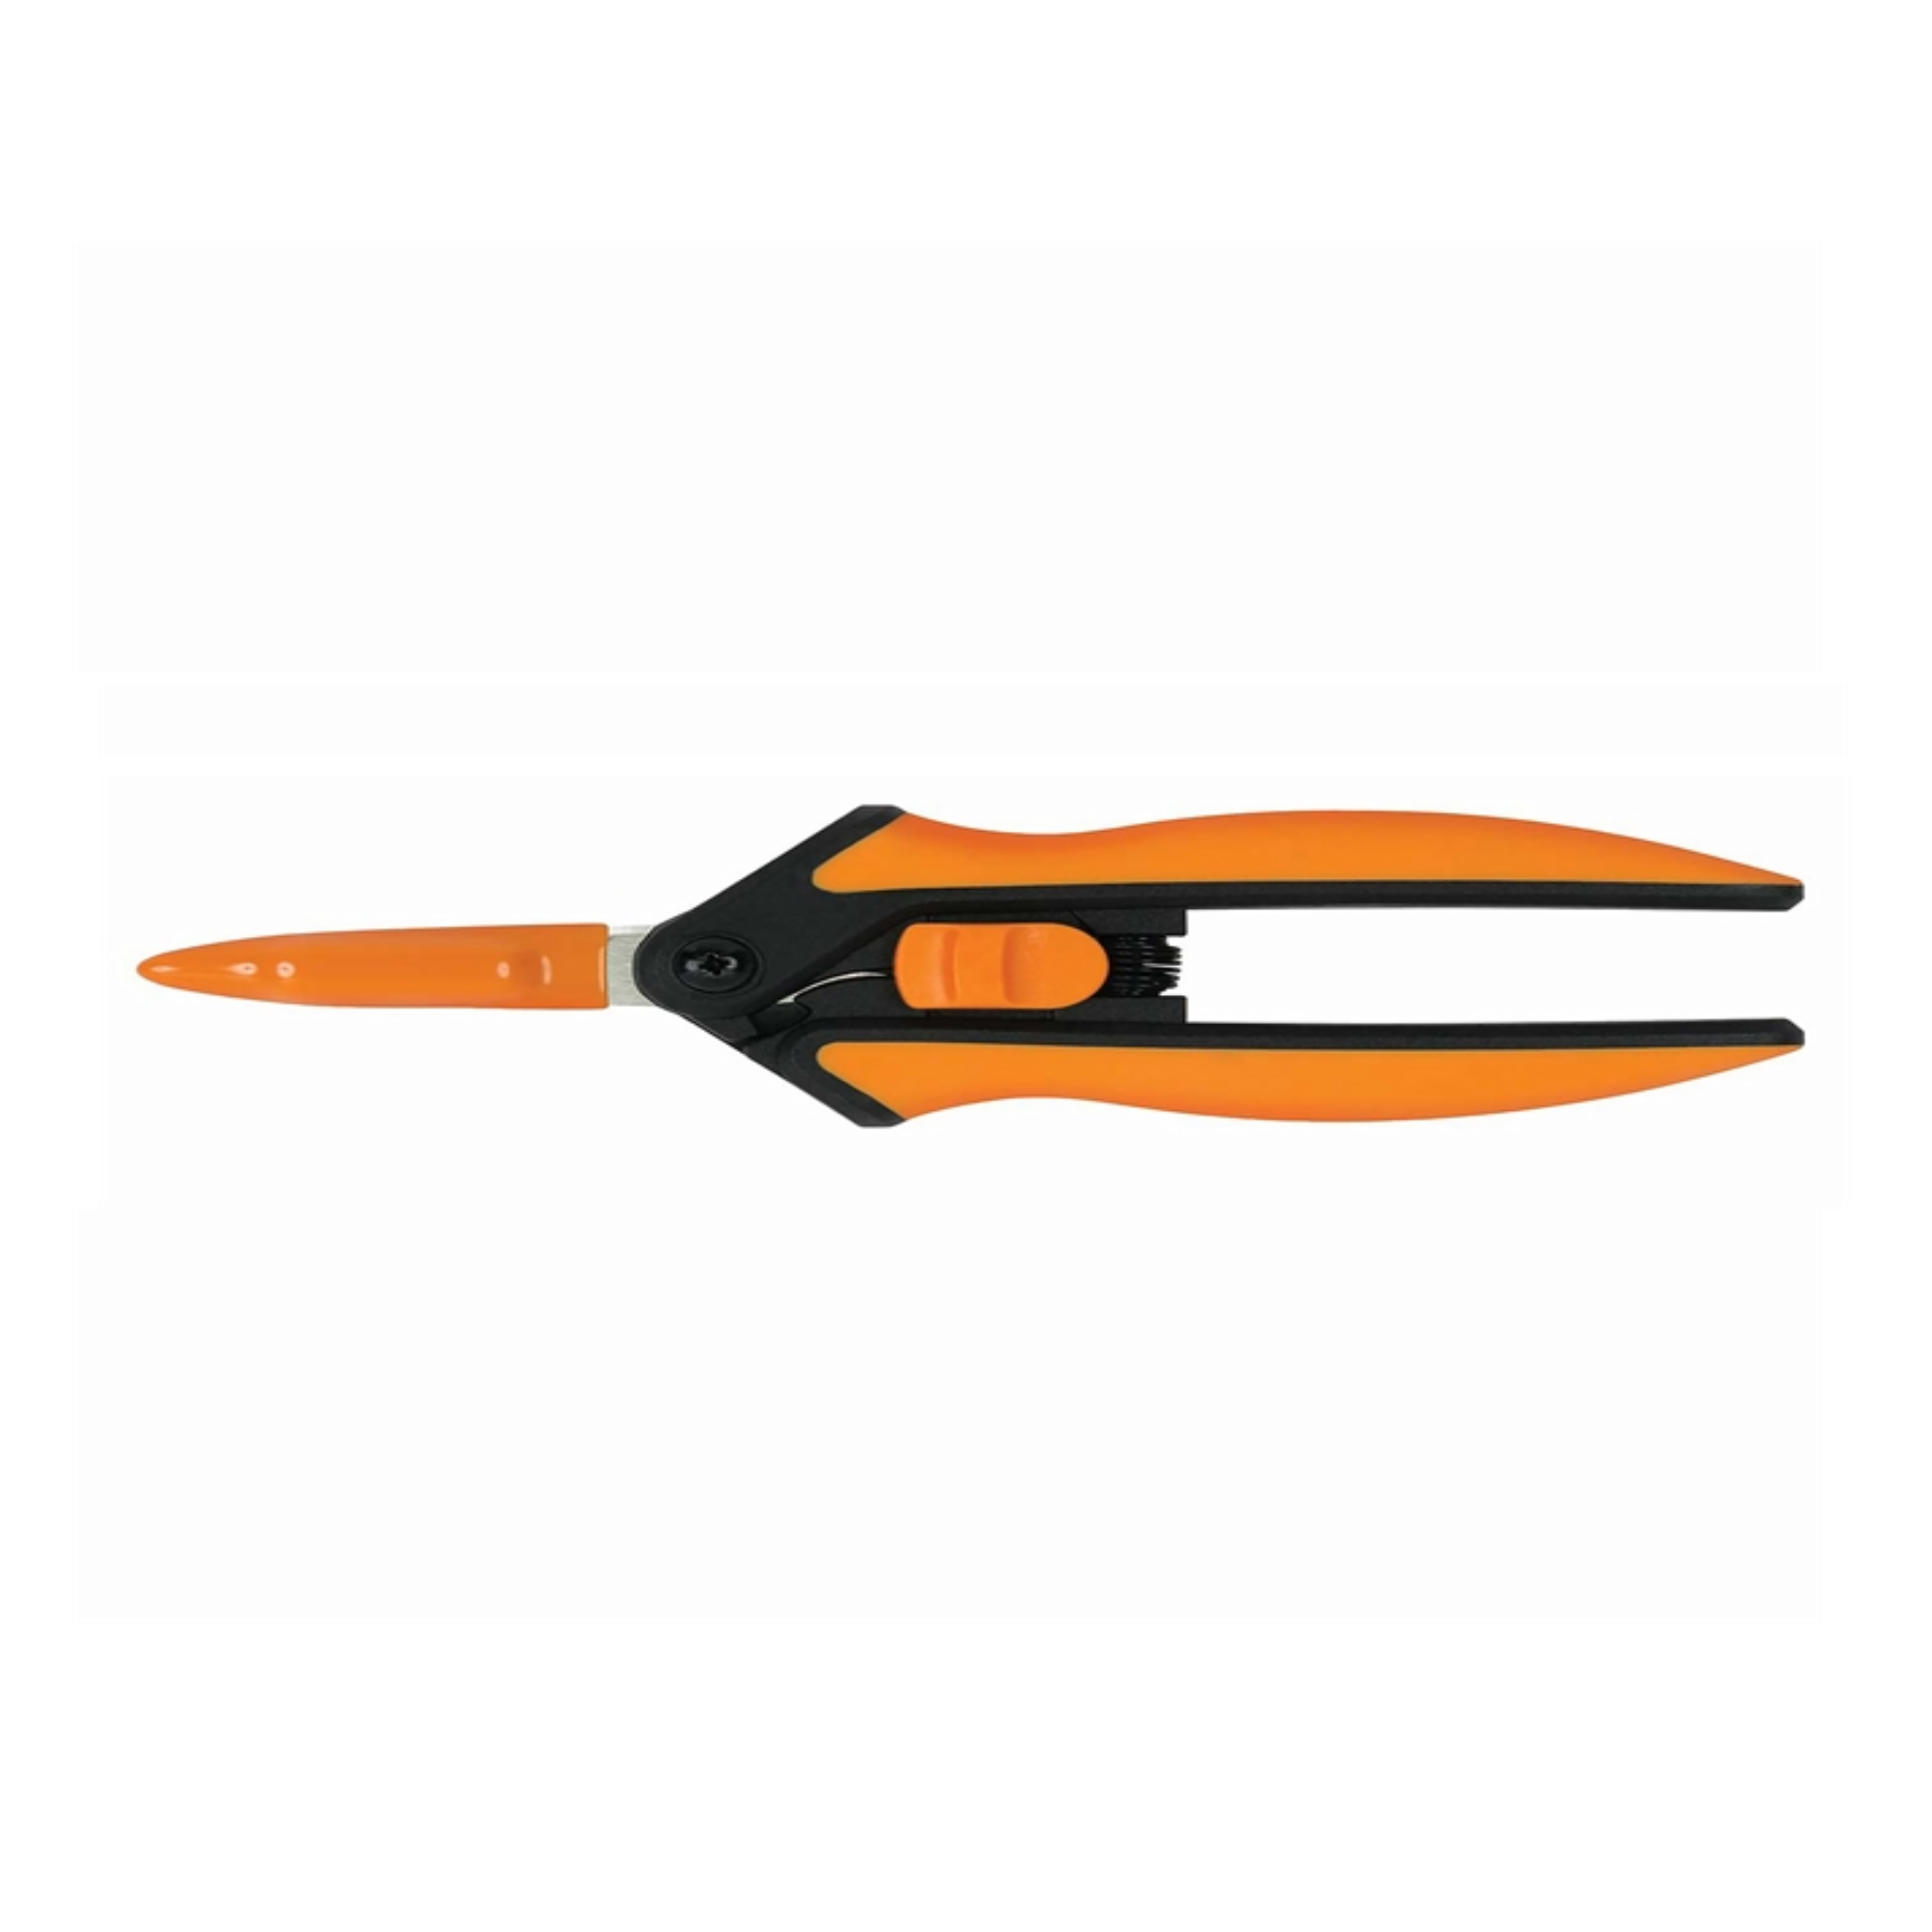 Fiskars Softouch Micro-Tip Pruning Snip, Non-Coated Blades, 6"